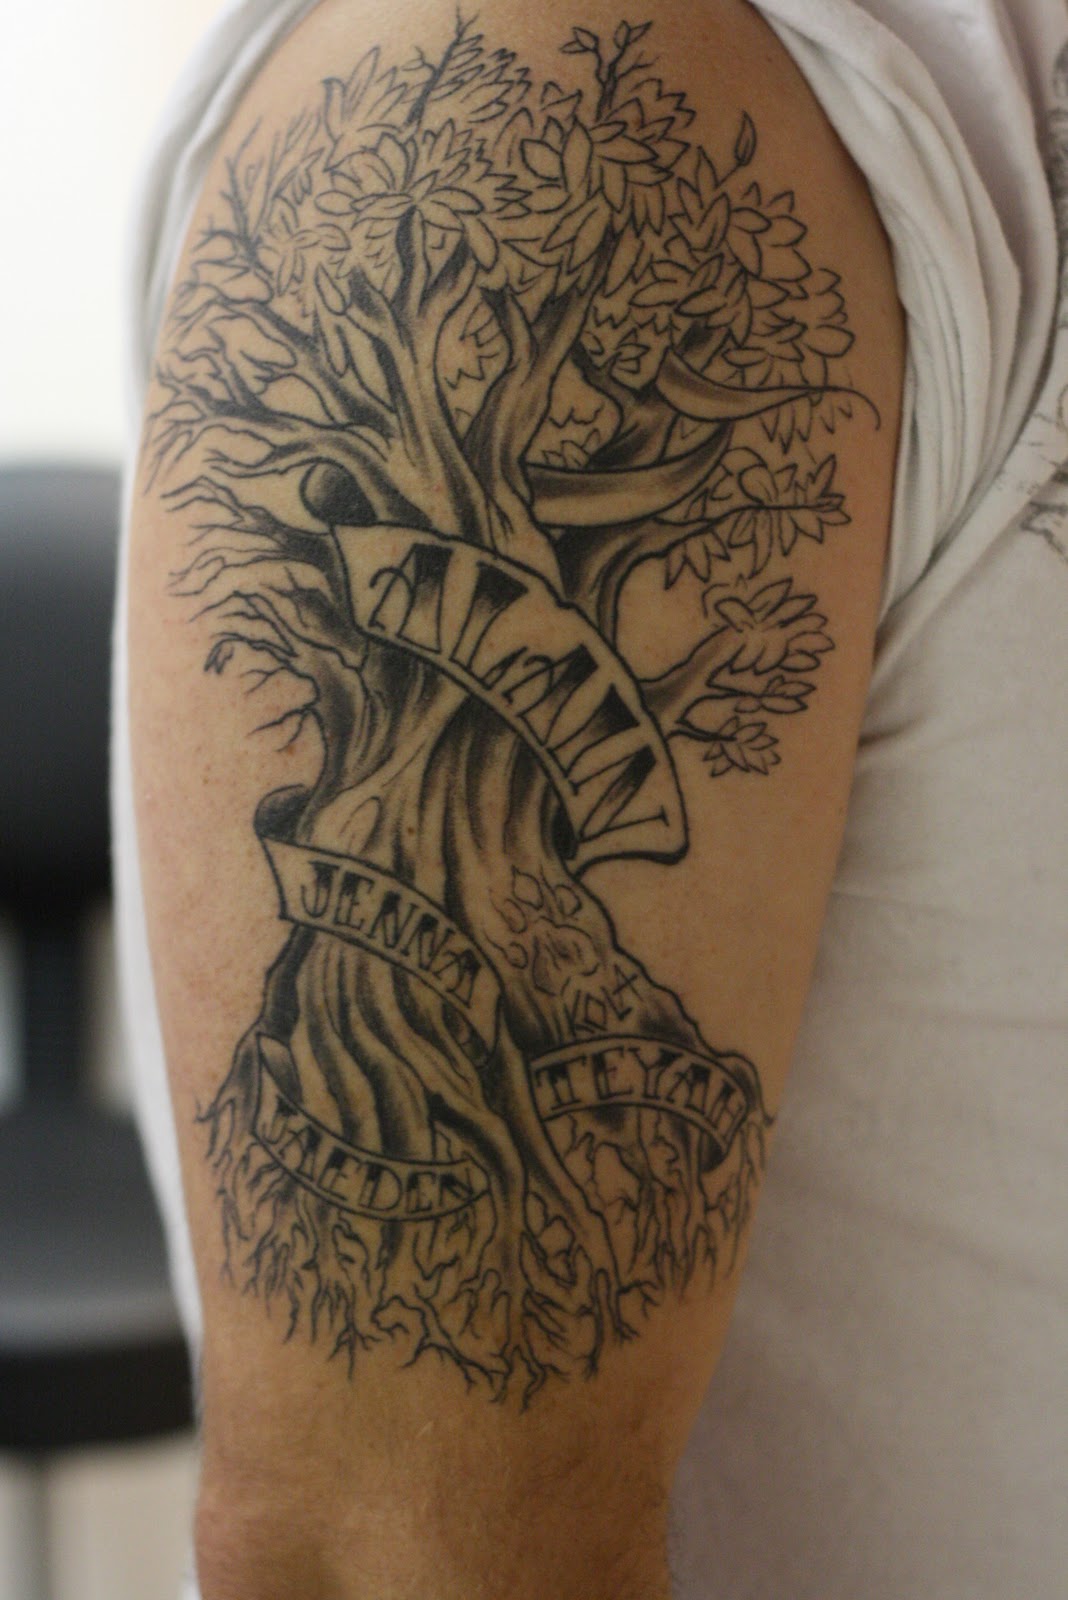 {best family tree tattoos for women| tattoos gallery | tattoos pictures | tattoos designs | small tattoos designs | free tattoo designs | tattoo design for girl | tree tattoos meaning | tree tattoos on arm | tree tattoos on back | simple tree tattoos | tree tattoos | tree tattoos for guys | tree tattoos designs | small tree tattoos | tree tattoos shoulder | tattoo design for men | japanese tattoos designs | japanese tattoos sleeve | japanese tattoos for men | japanese tattoos meanings | cherry blossom tattoo wrist | cherry blossom tattoos | feminine cherry blossom tattoo | cherry blossom tattoo small | cherry blossom tattoo black and white | cherry tattoos meaning | tribal tattoos | tribal tattoos meanings | tribal tattoos sleeve | types of tribal tattoos | tribal tattoos designs | tribal tattoos for men | african tribal tattoos meanings | tribal tattoos for men shoulder and arm | small tribal tattoos | cherry tattoos on hip | cute cherry tattoos | cherry tattoos tumblr | cherry tattoos black and white | dragon tattoos on arm | dragon tattoos on back | dragon tattoos sleeve | dragon tattoos meaning | dragon tattoos designs | small dragon tattoos | chinese dragon tattoos for men | dragon tattoos on forearm | small cherry tattoos | simple cherry tattoo | cherry tattoo outline | cherry blossom tattoo sleeve | japanese cherry blossom tattoo designs | cherry blossom tattoo men | cherry blossom tattoo watercolor | small japanese tattoos | traditional japanese tattoos | japanese tattoos words | japanese tattoos black and grey | tattoo designs and meanings | tattoo designs simple | rib cage tattoos for guys | rib cage tattoos for females | rib tattoos pain | rib tattoos small | rib tattoos for guys | rib cage tattoo male | rib cage tattoos | women's side rib tattoos | rib tattoos quotes | tattoo designs name | tattoo designs on hand | tattoos for men | tattoos for girls | tattoo ideas for girls | tattoo ideas small | tattoo ideas men | tattoo ideas with meaning | tattoo ideas for men arm | unique tattoo ideas | meaningful tattoo ideas | tattoo ideas for men with meaning | tattoos ideas | tattoos small | female tattoos gallery | best female tattoos | best female tattoos 2019 | delicate female tattoos | female tattoos designs for arms | best female tattoos on hand | female tattoos designs on the back | girly tattoos pictures | female tattoos | tattoos for men with meaning | tattoos for men on arm | tattoos for men on forearm | 2018 tattoos for men | small tattoos for men | small tattoos for men with meaning | tattoos for men on hand | simple hand tattoos for mens}